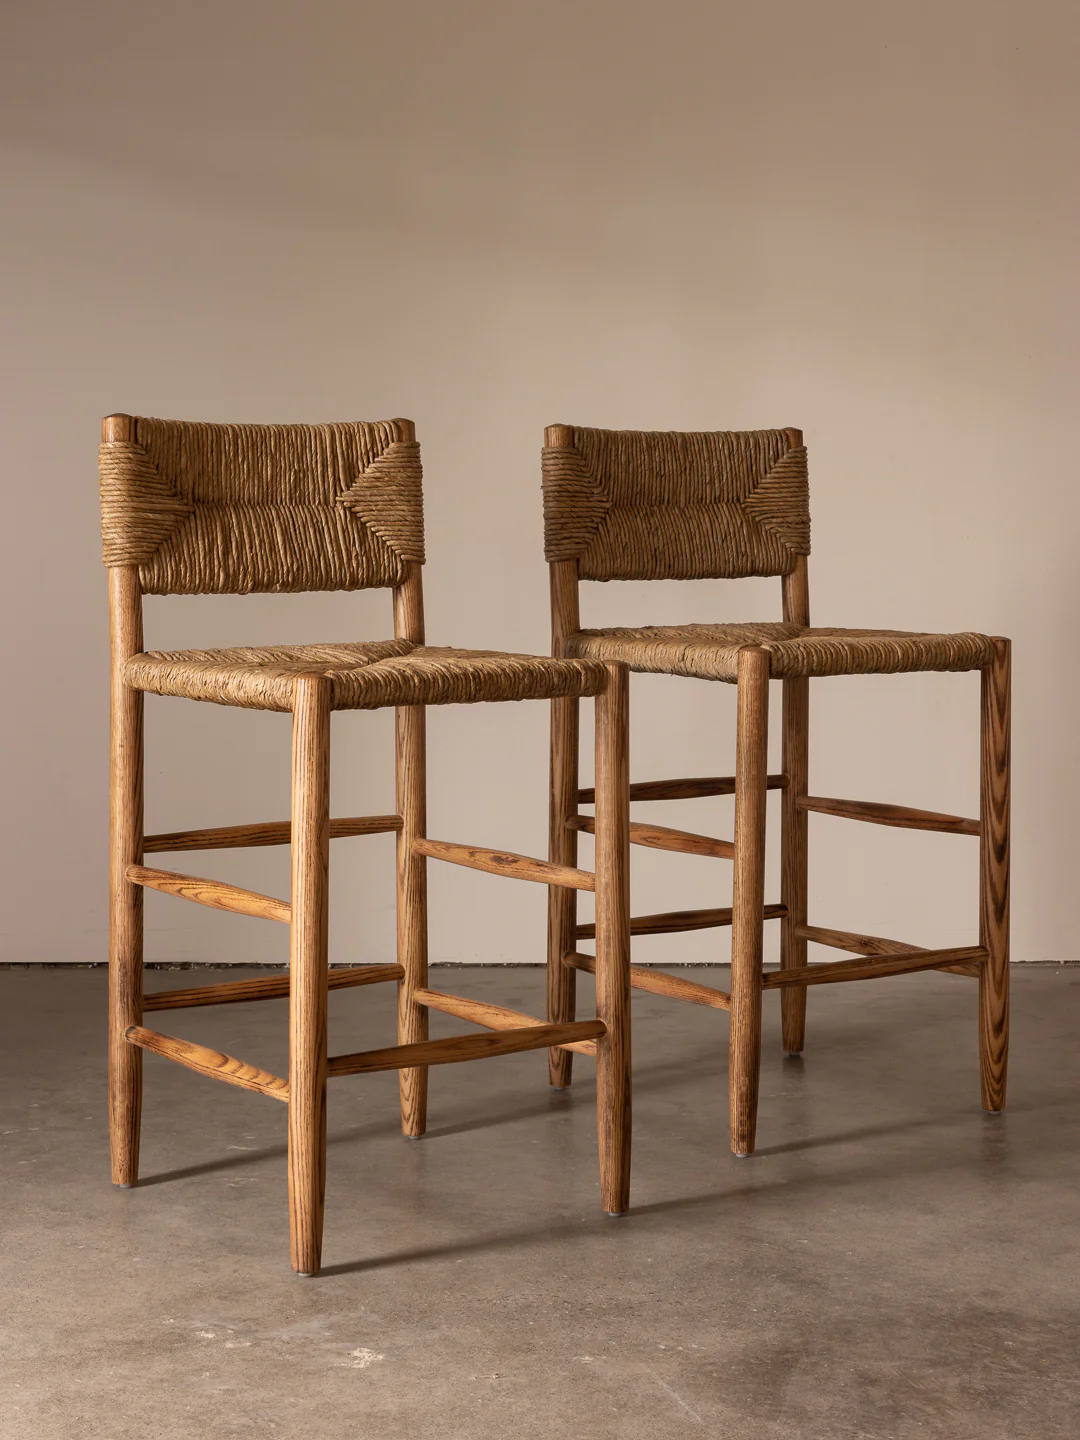 a pair of wooden chairs sitting next to each other